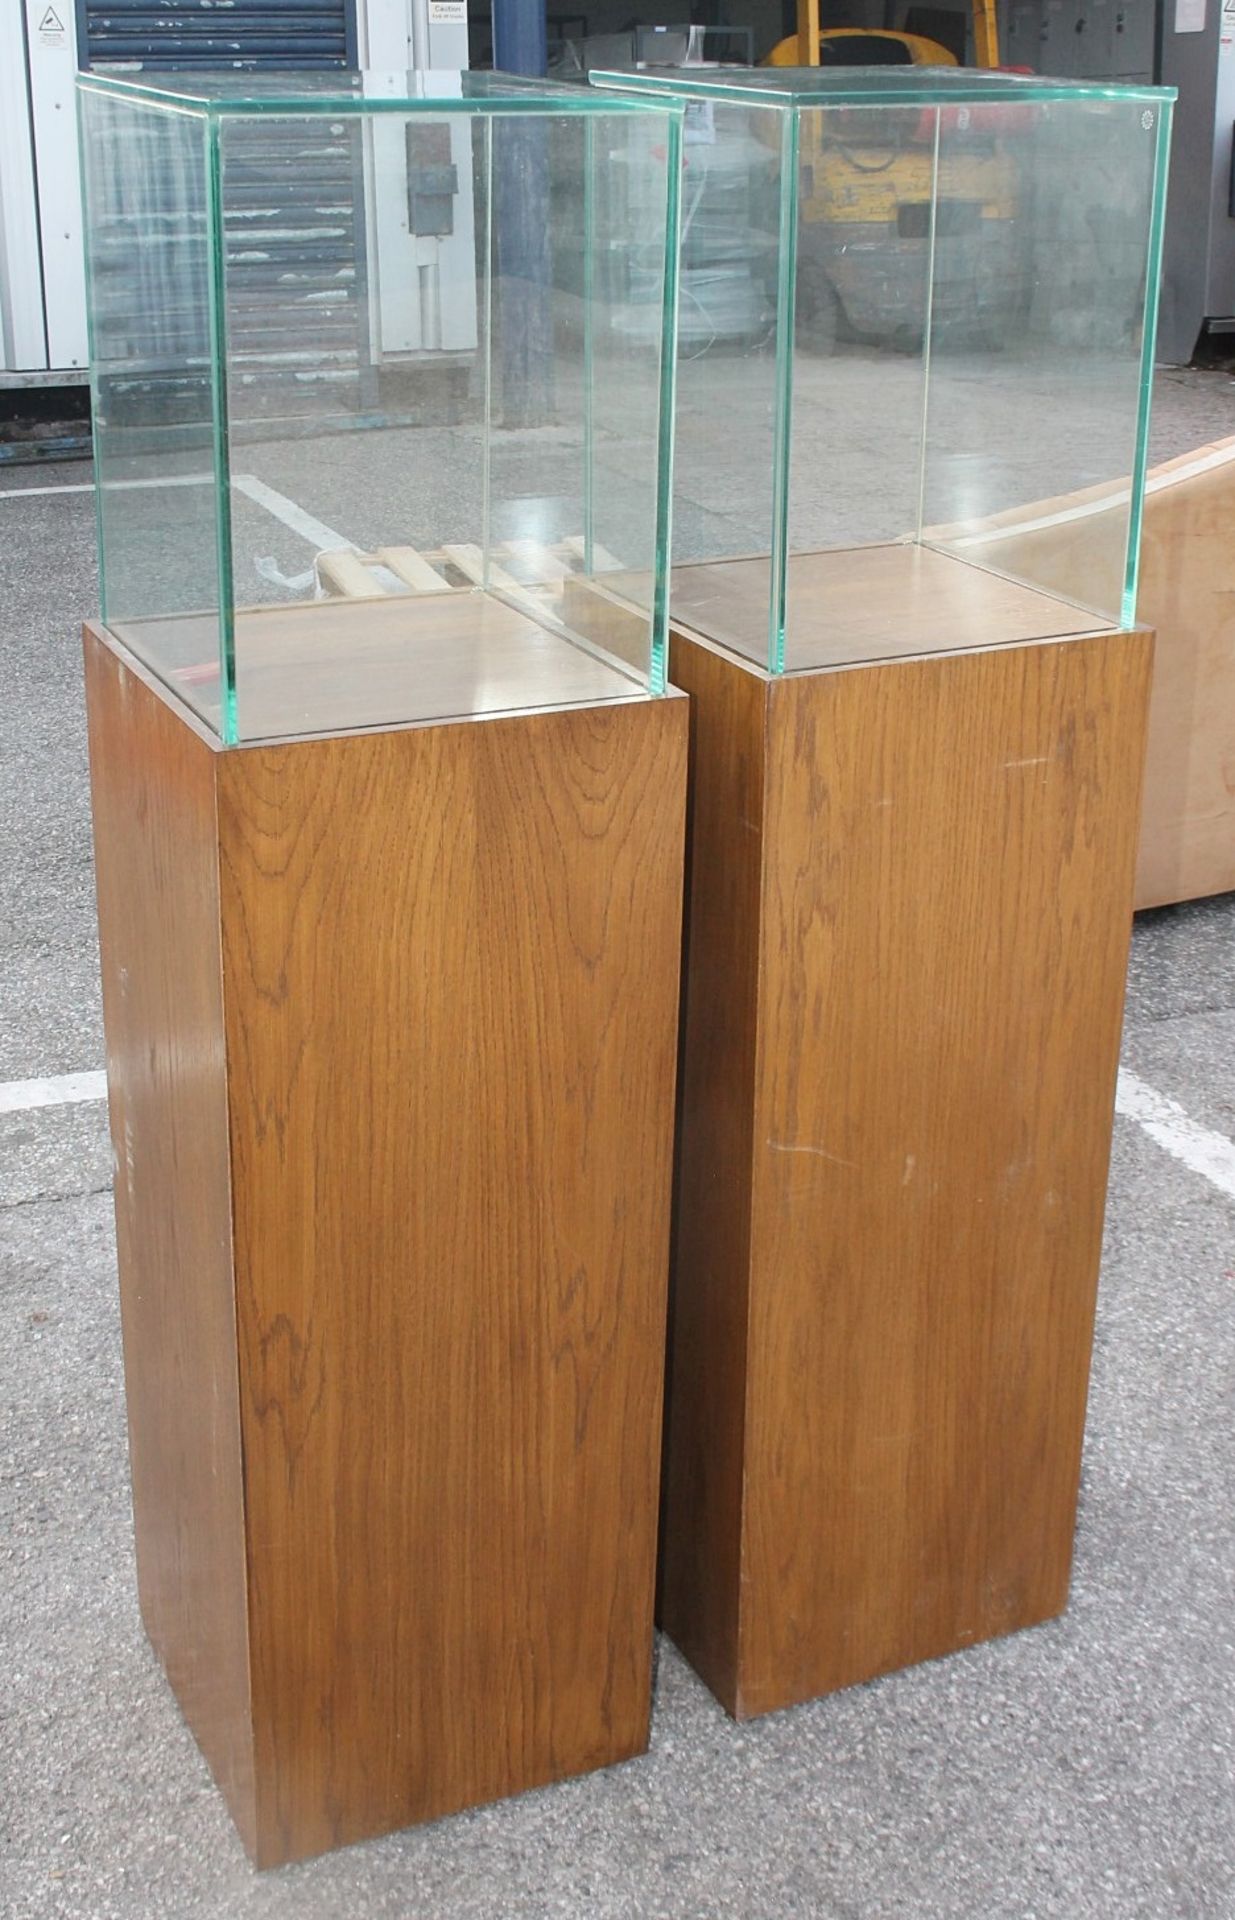 A Pair Of Wooden Plinths With Glass Tops - Recently Removed From A World-renowned London - Image 3 of 5